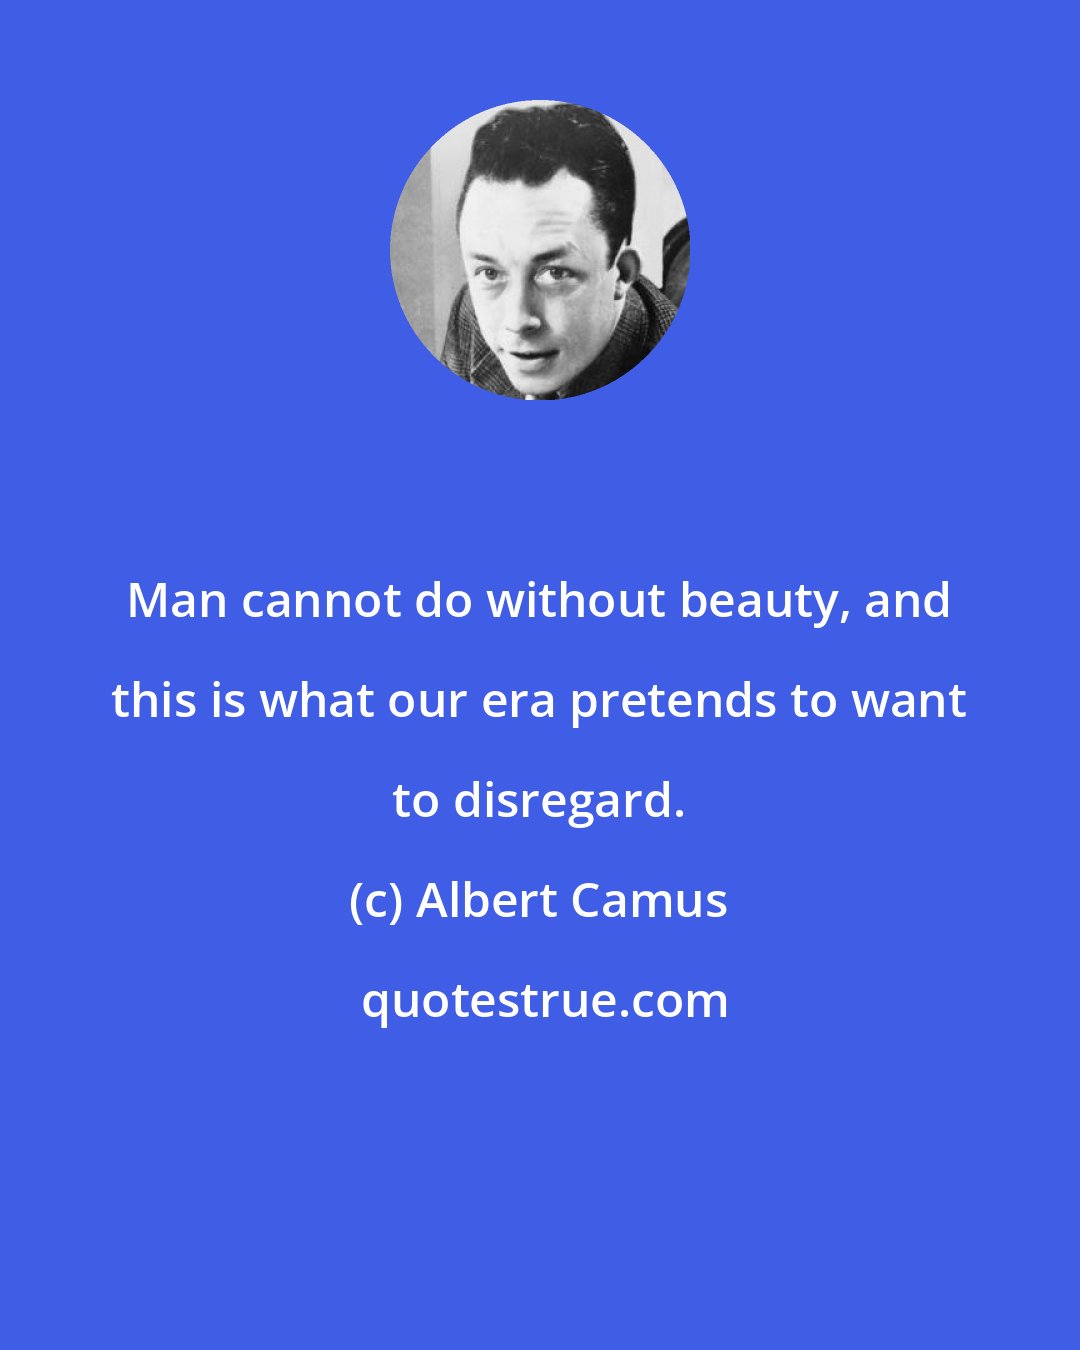 Albert Camus: Man cannot do without beauty, and this is what our era pretends to want to disregard.